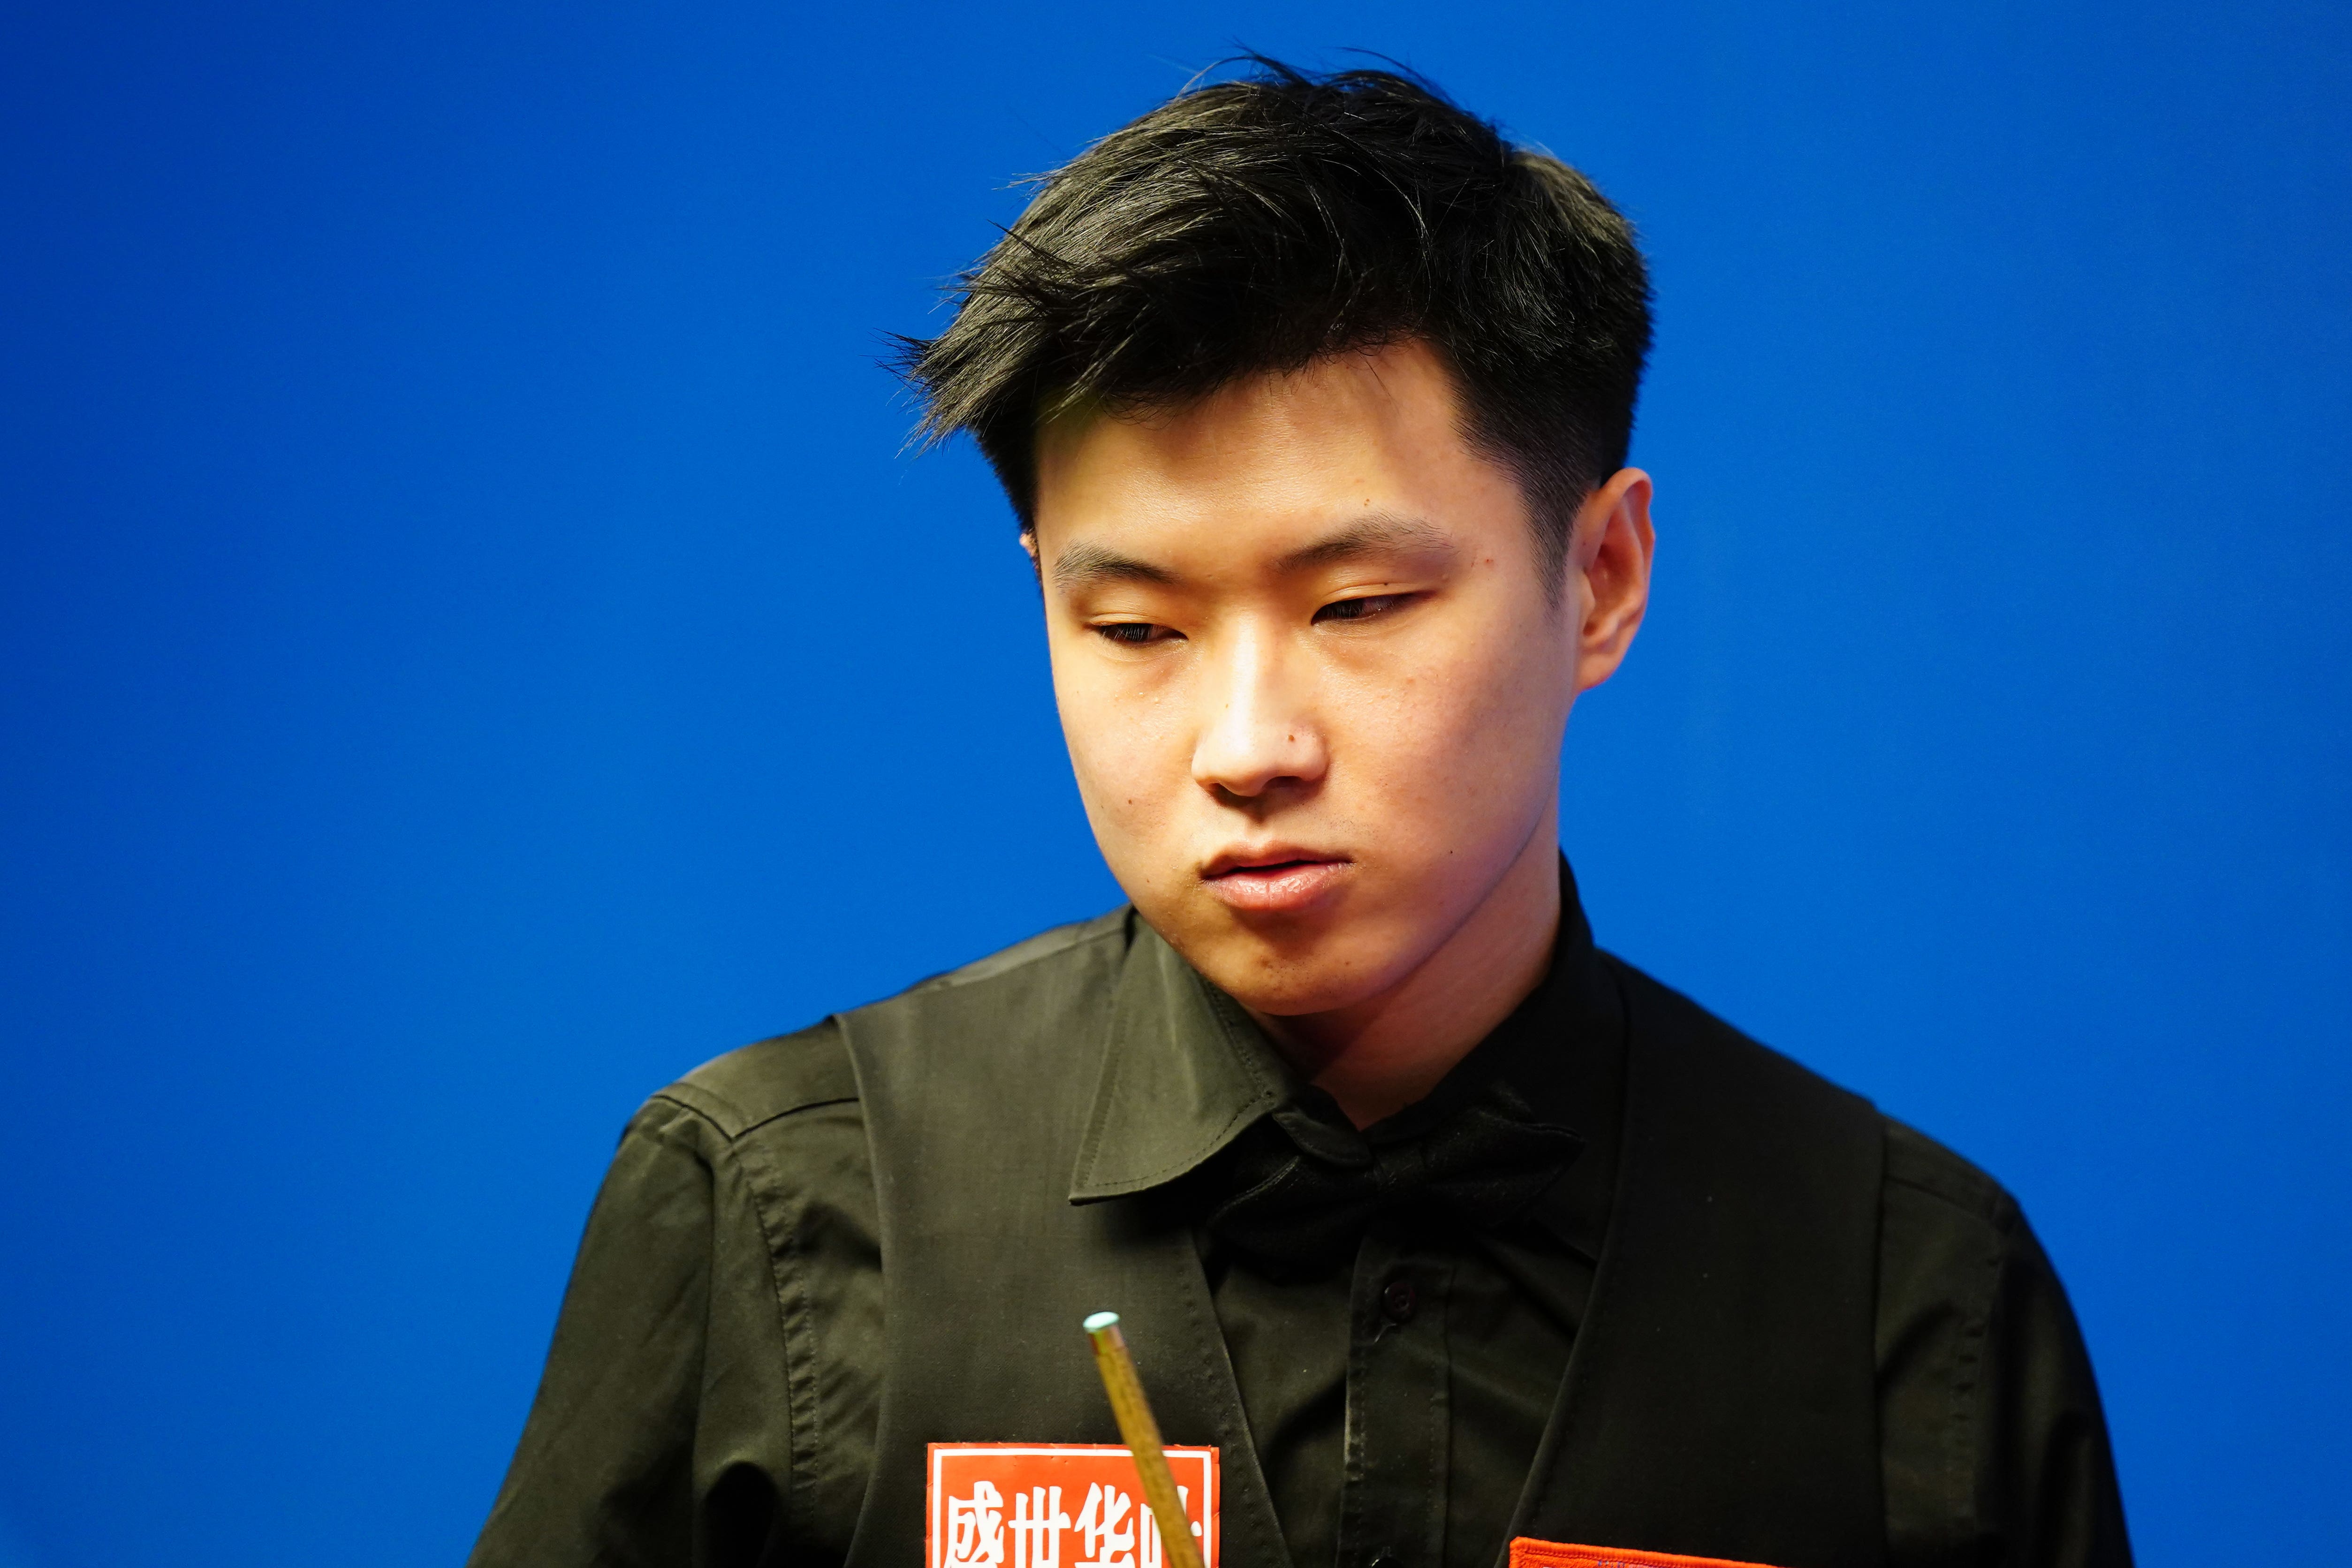 Zhao Xintong is the most high-profile name caught up in snooker’s latest match-fixing scandal